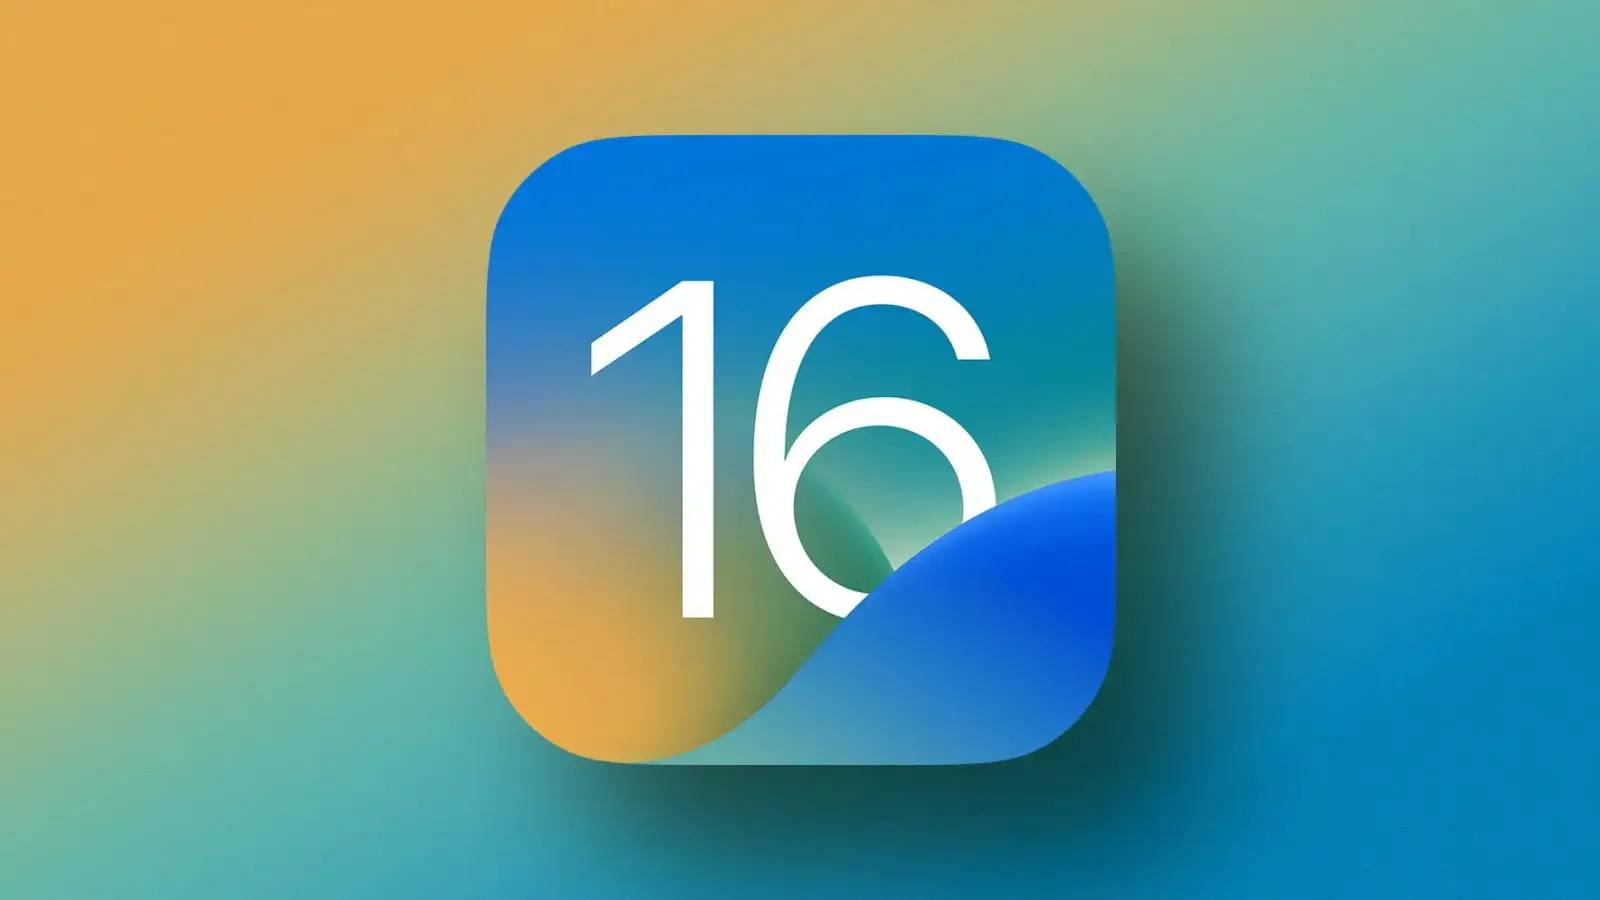 iOS 16.1 Brings a Very Important Change for iPhone